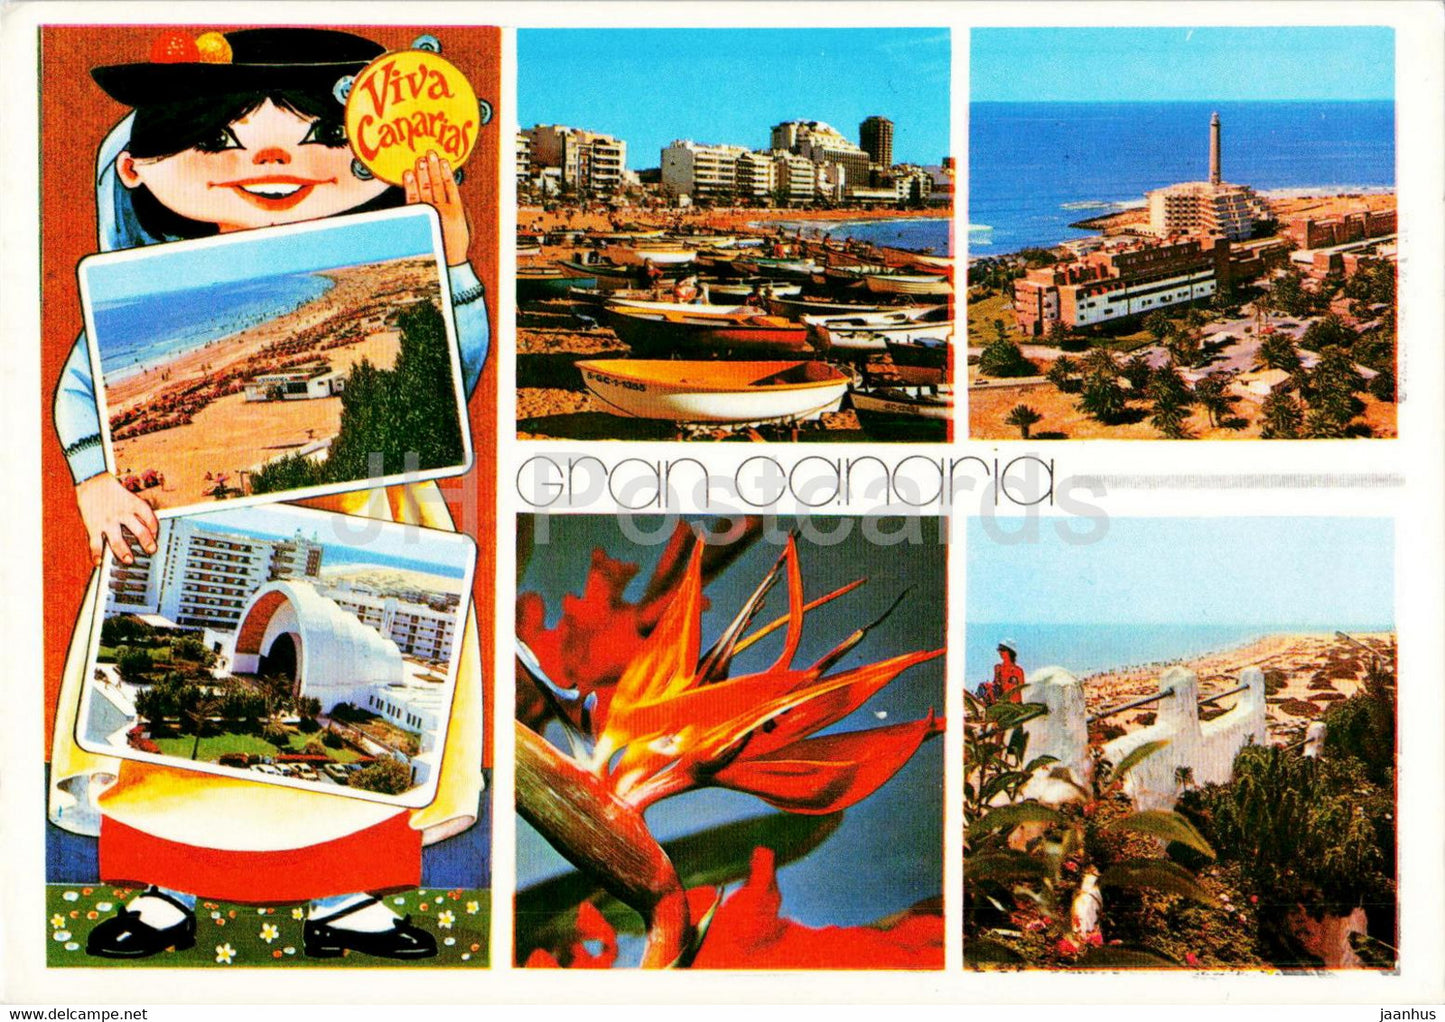 Gran Canaria - boat - illustration - multiview - Spain - used - JH Postcards